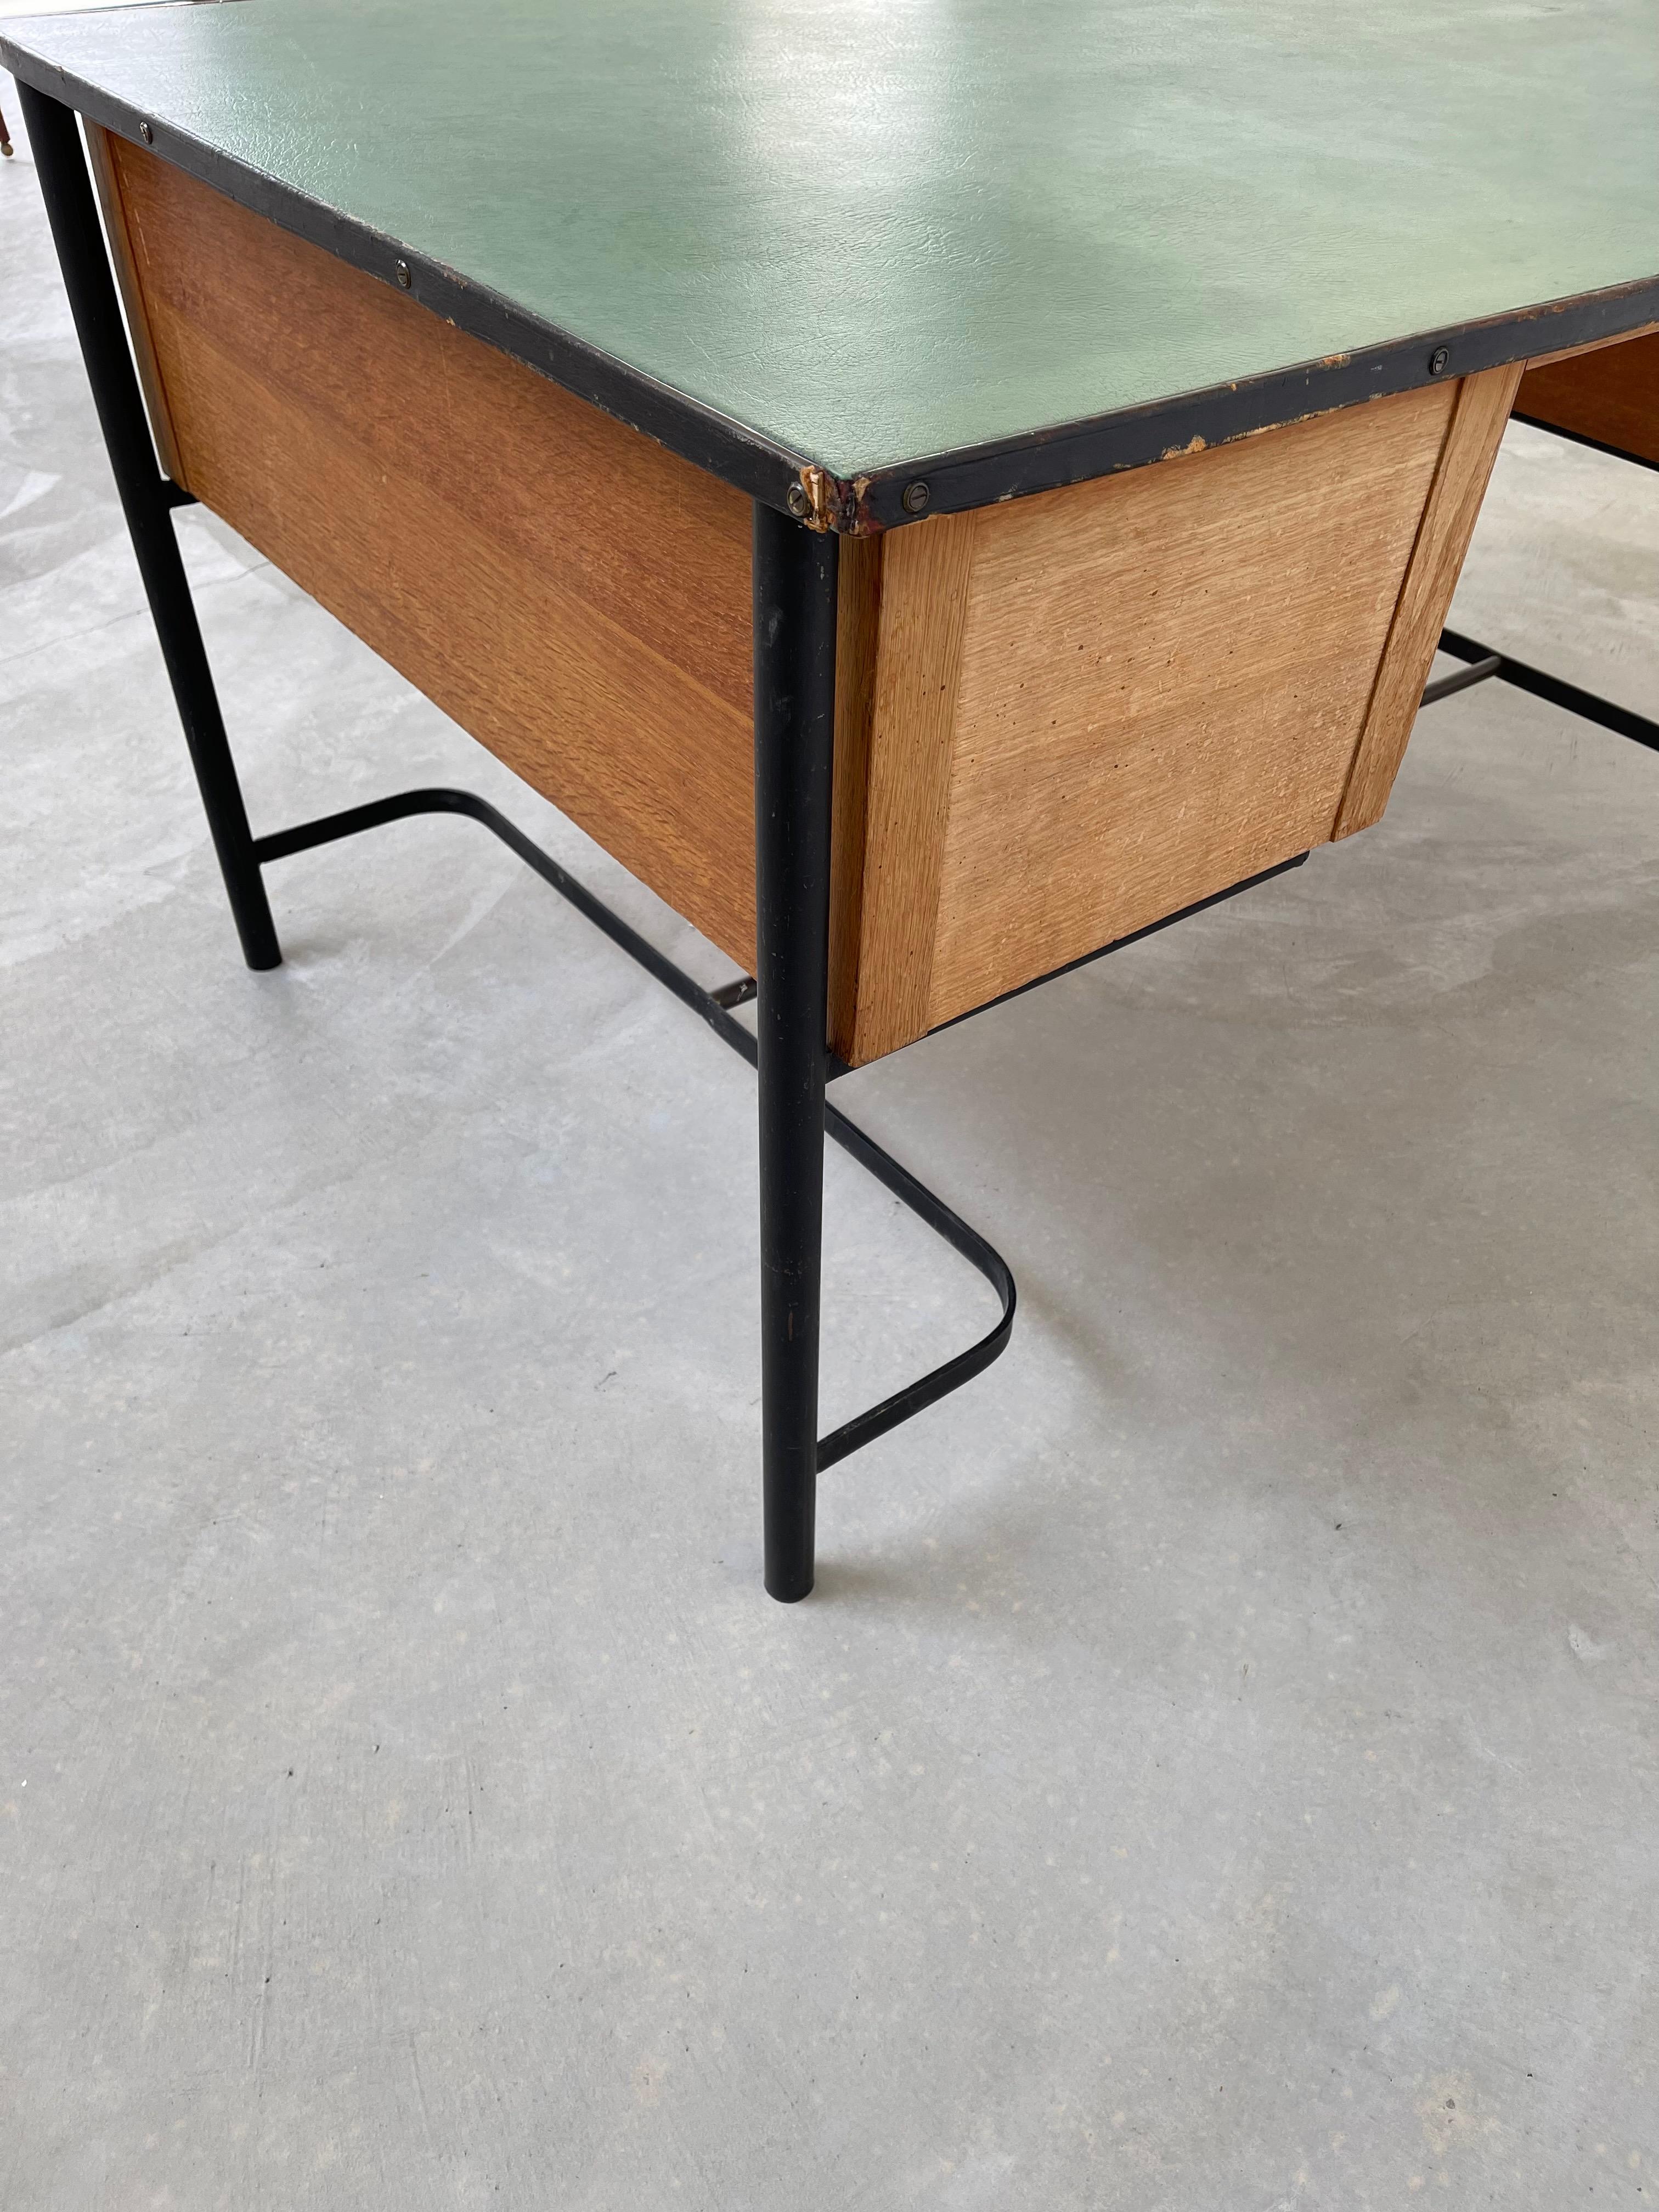 Jacques Adnet Leather and Oak Desk, 1950s France For Sale 5